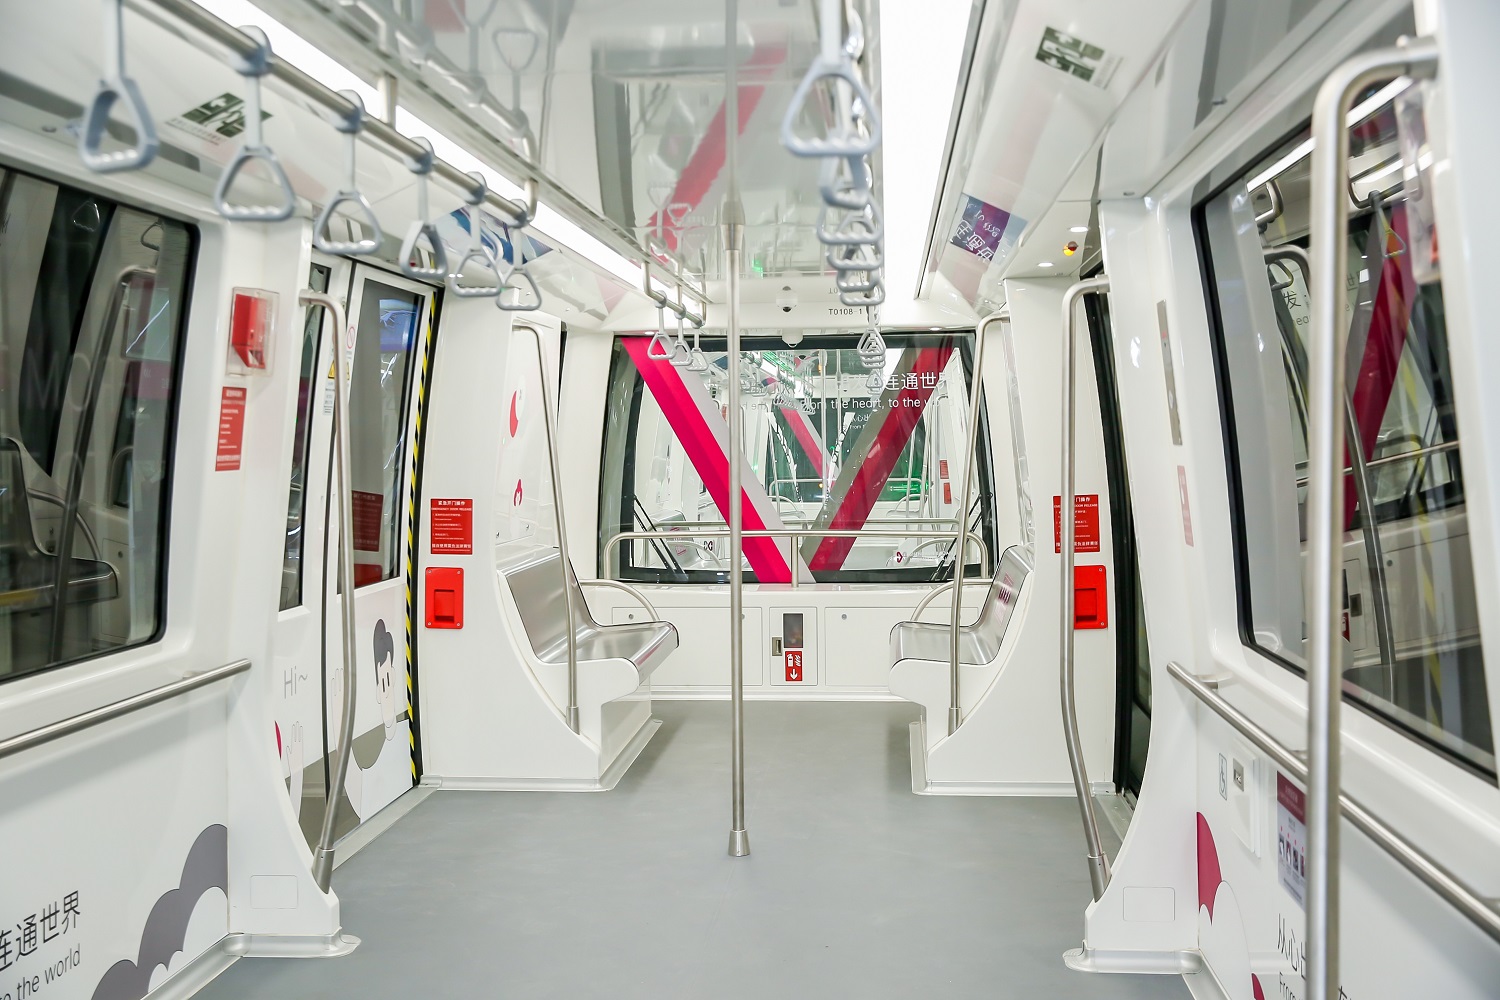 Interior of the Shenzen APM automated people mover